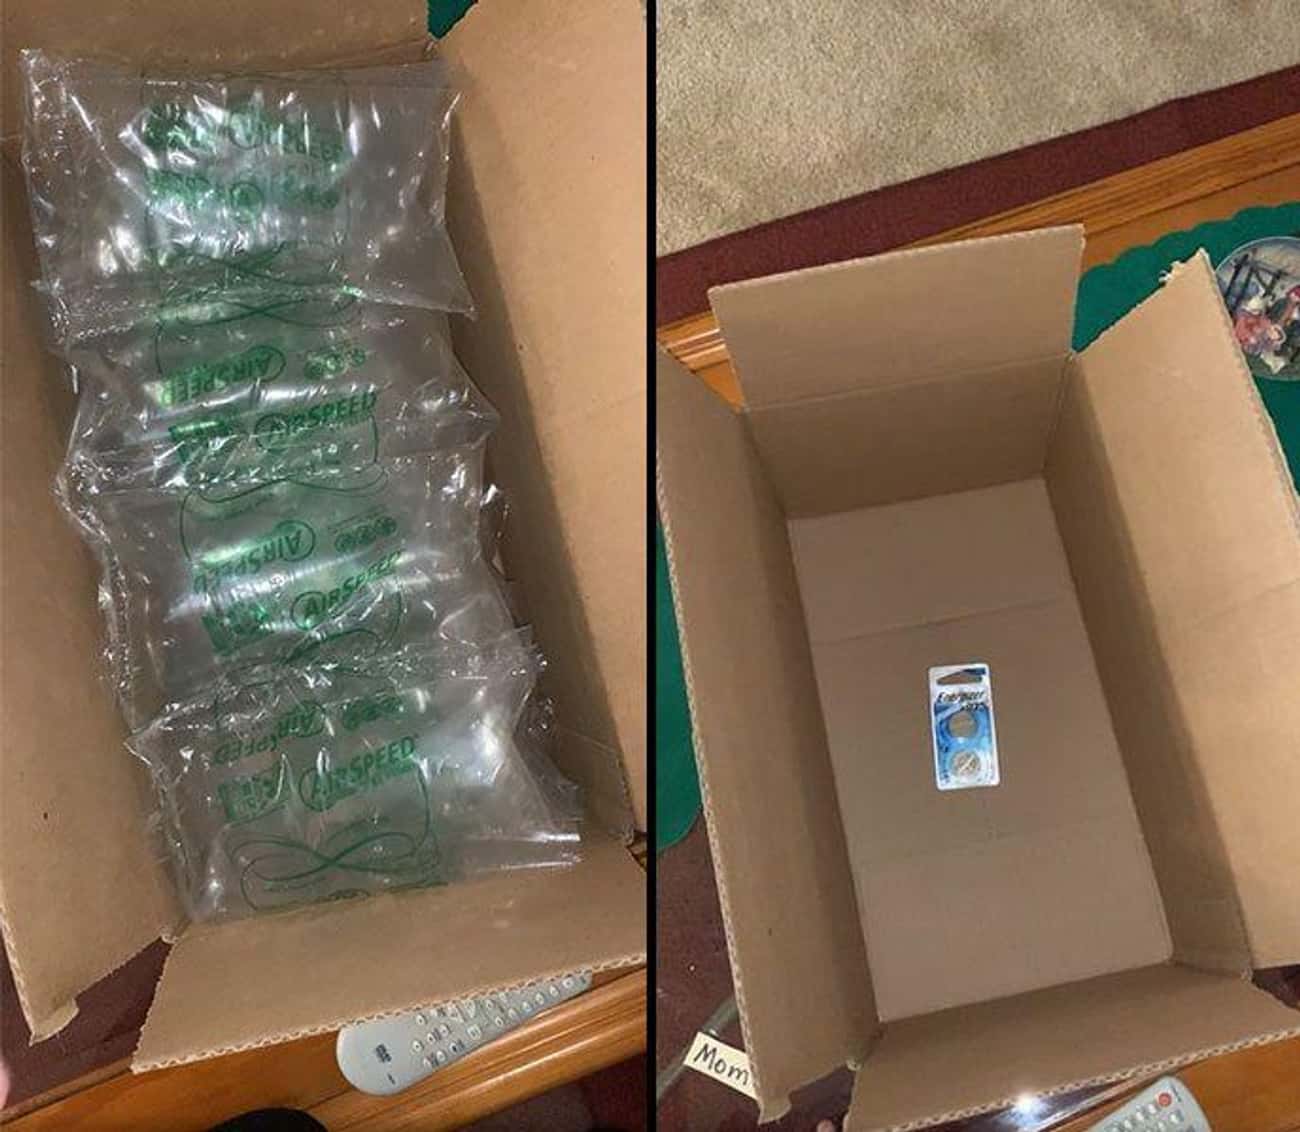 "I Received A Package On Amazon Today"